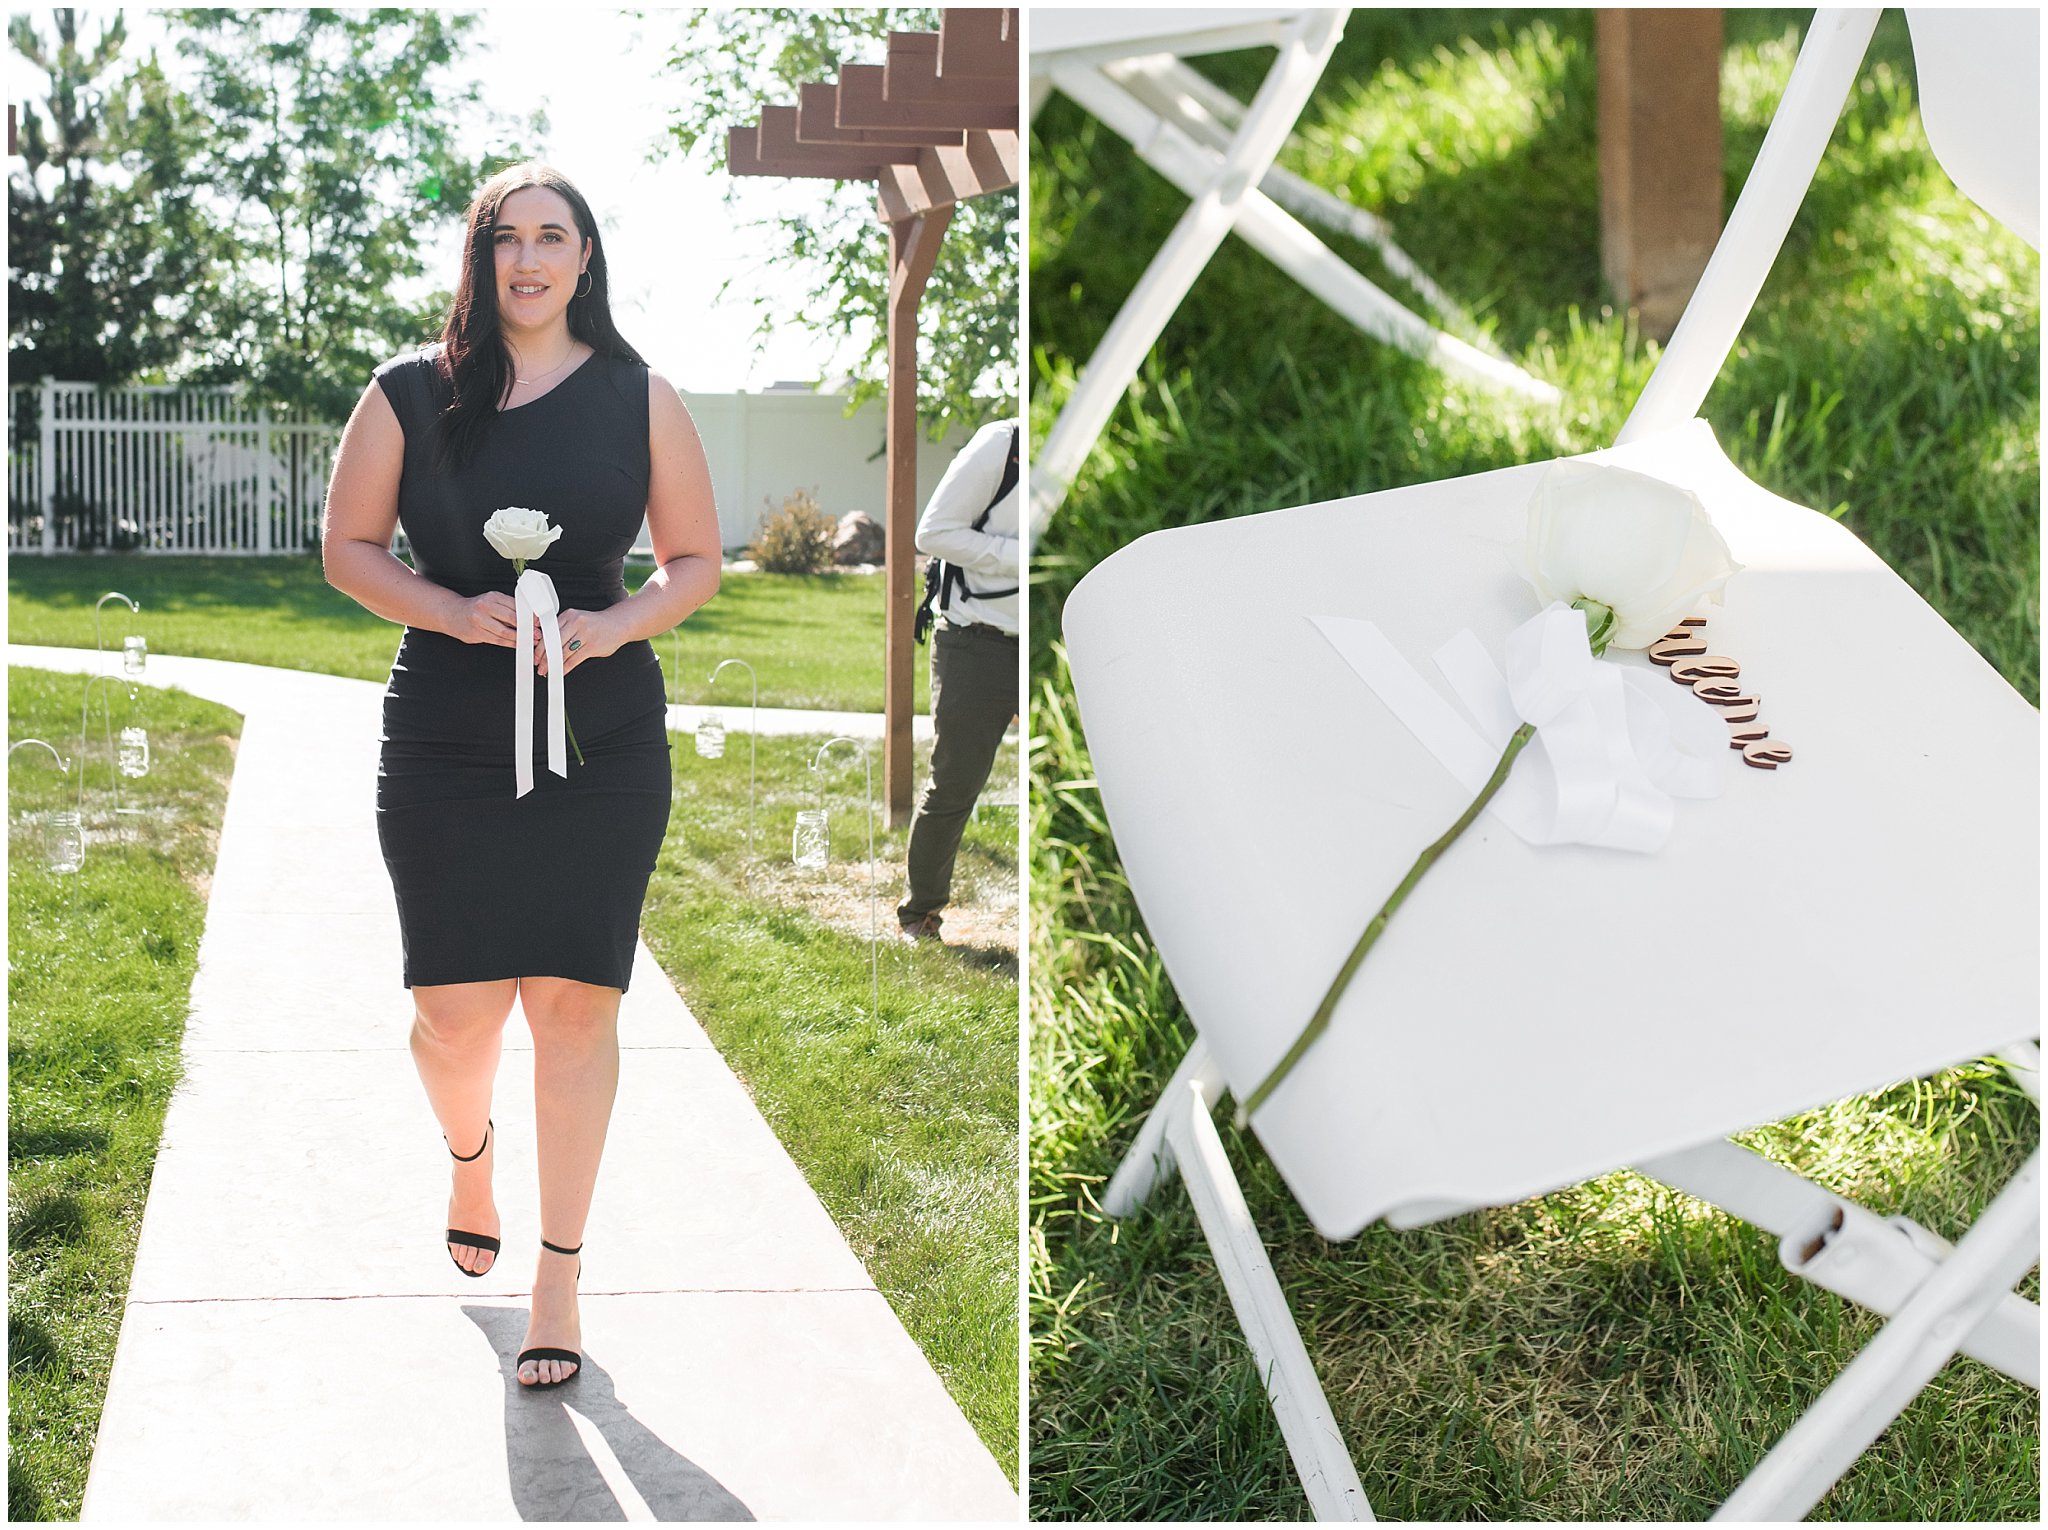 Rose placed at ceremony for loved one who passed away | Sage Green and Gray Summer Wedding at Oak Hills | Jessie and Dallin Photography